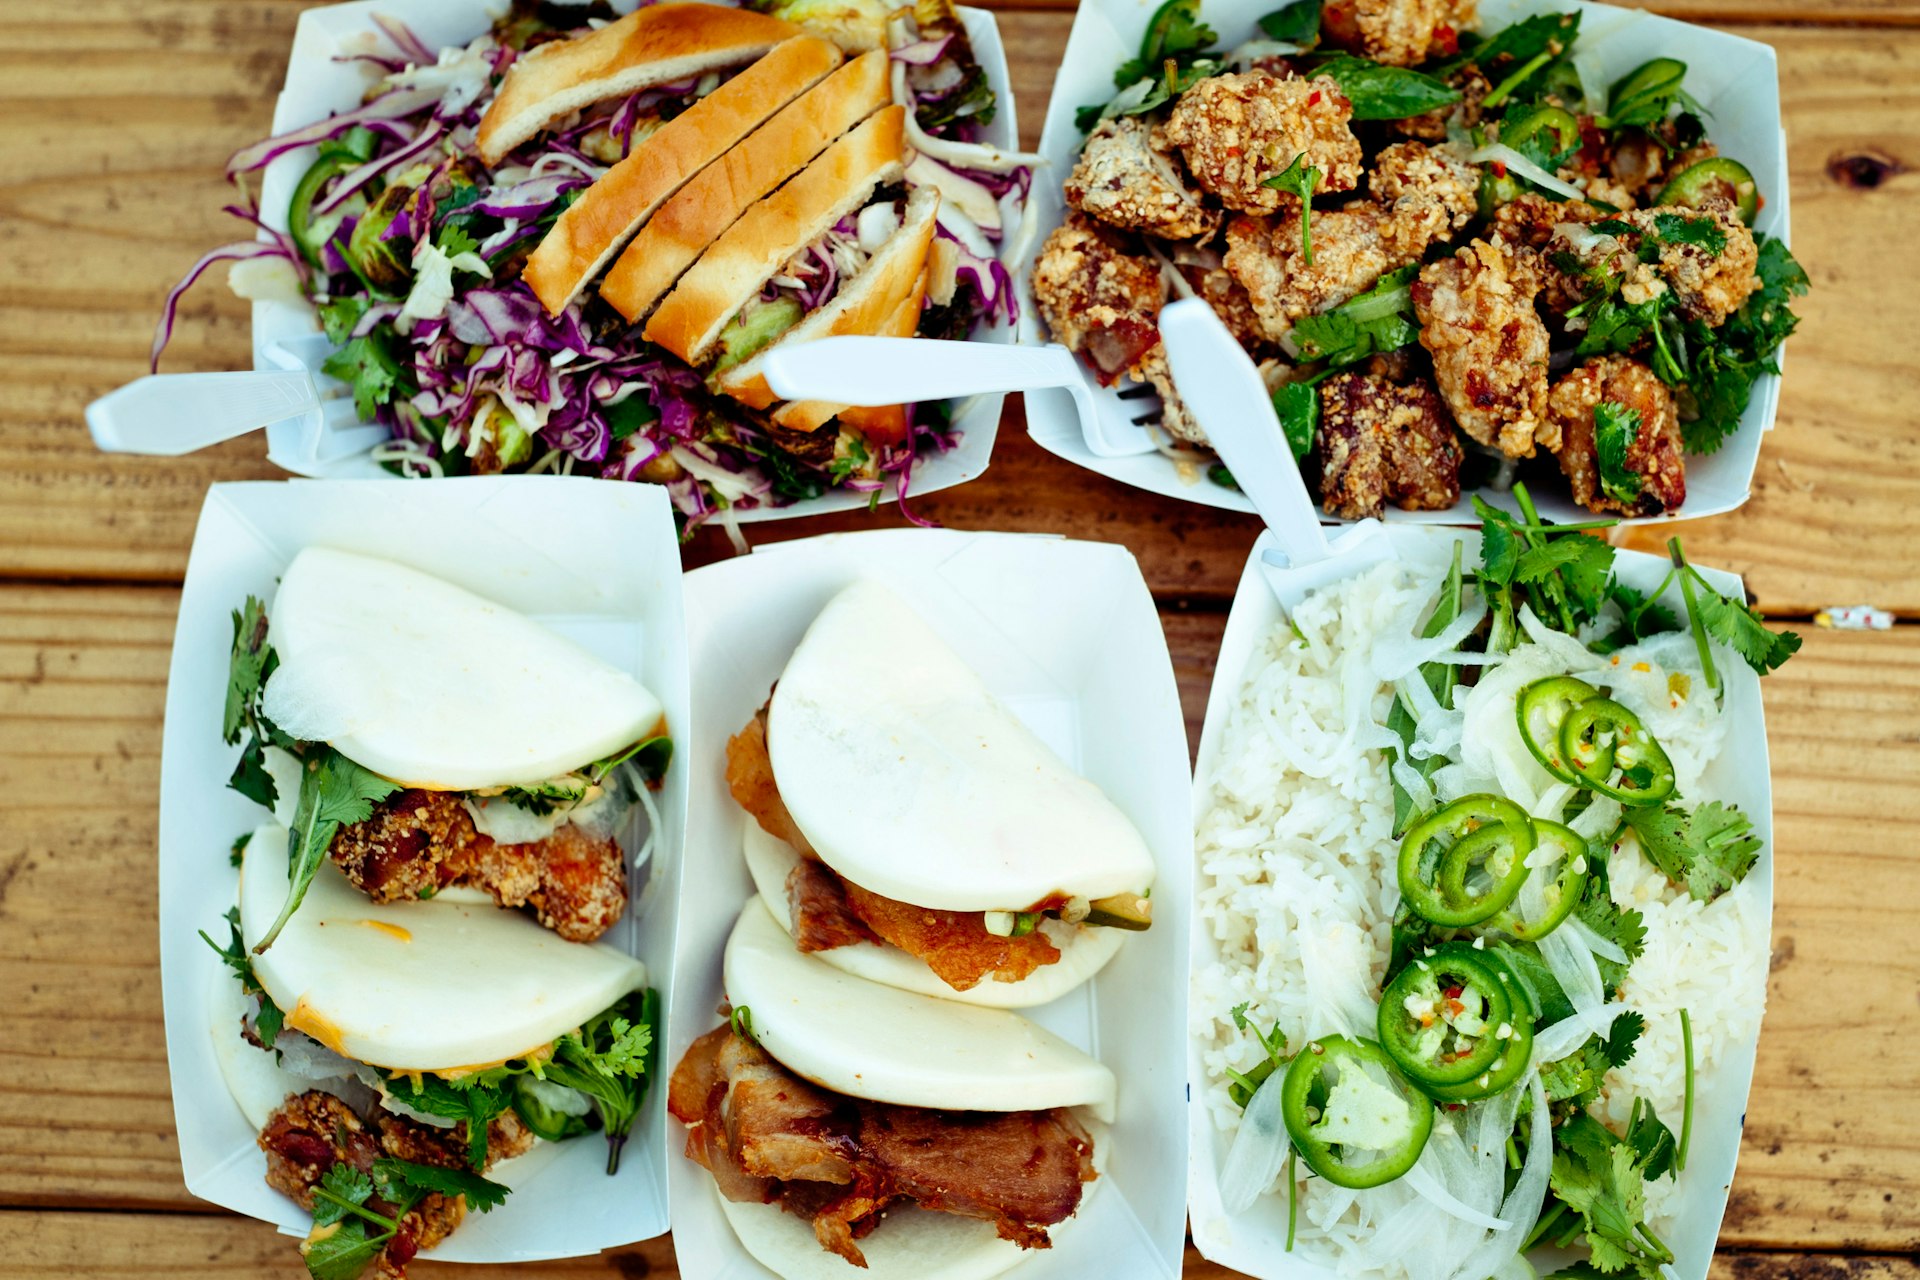 Texas-Korean fusion plates from a food truck in Austin, TX. Image by gabriela herman / Getty